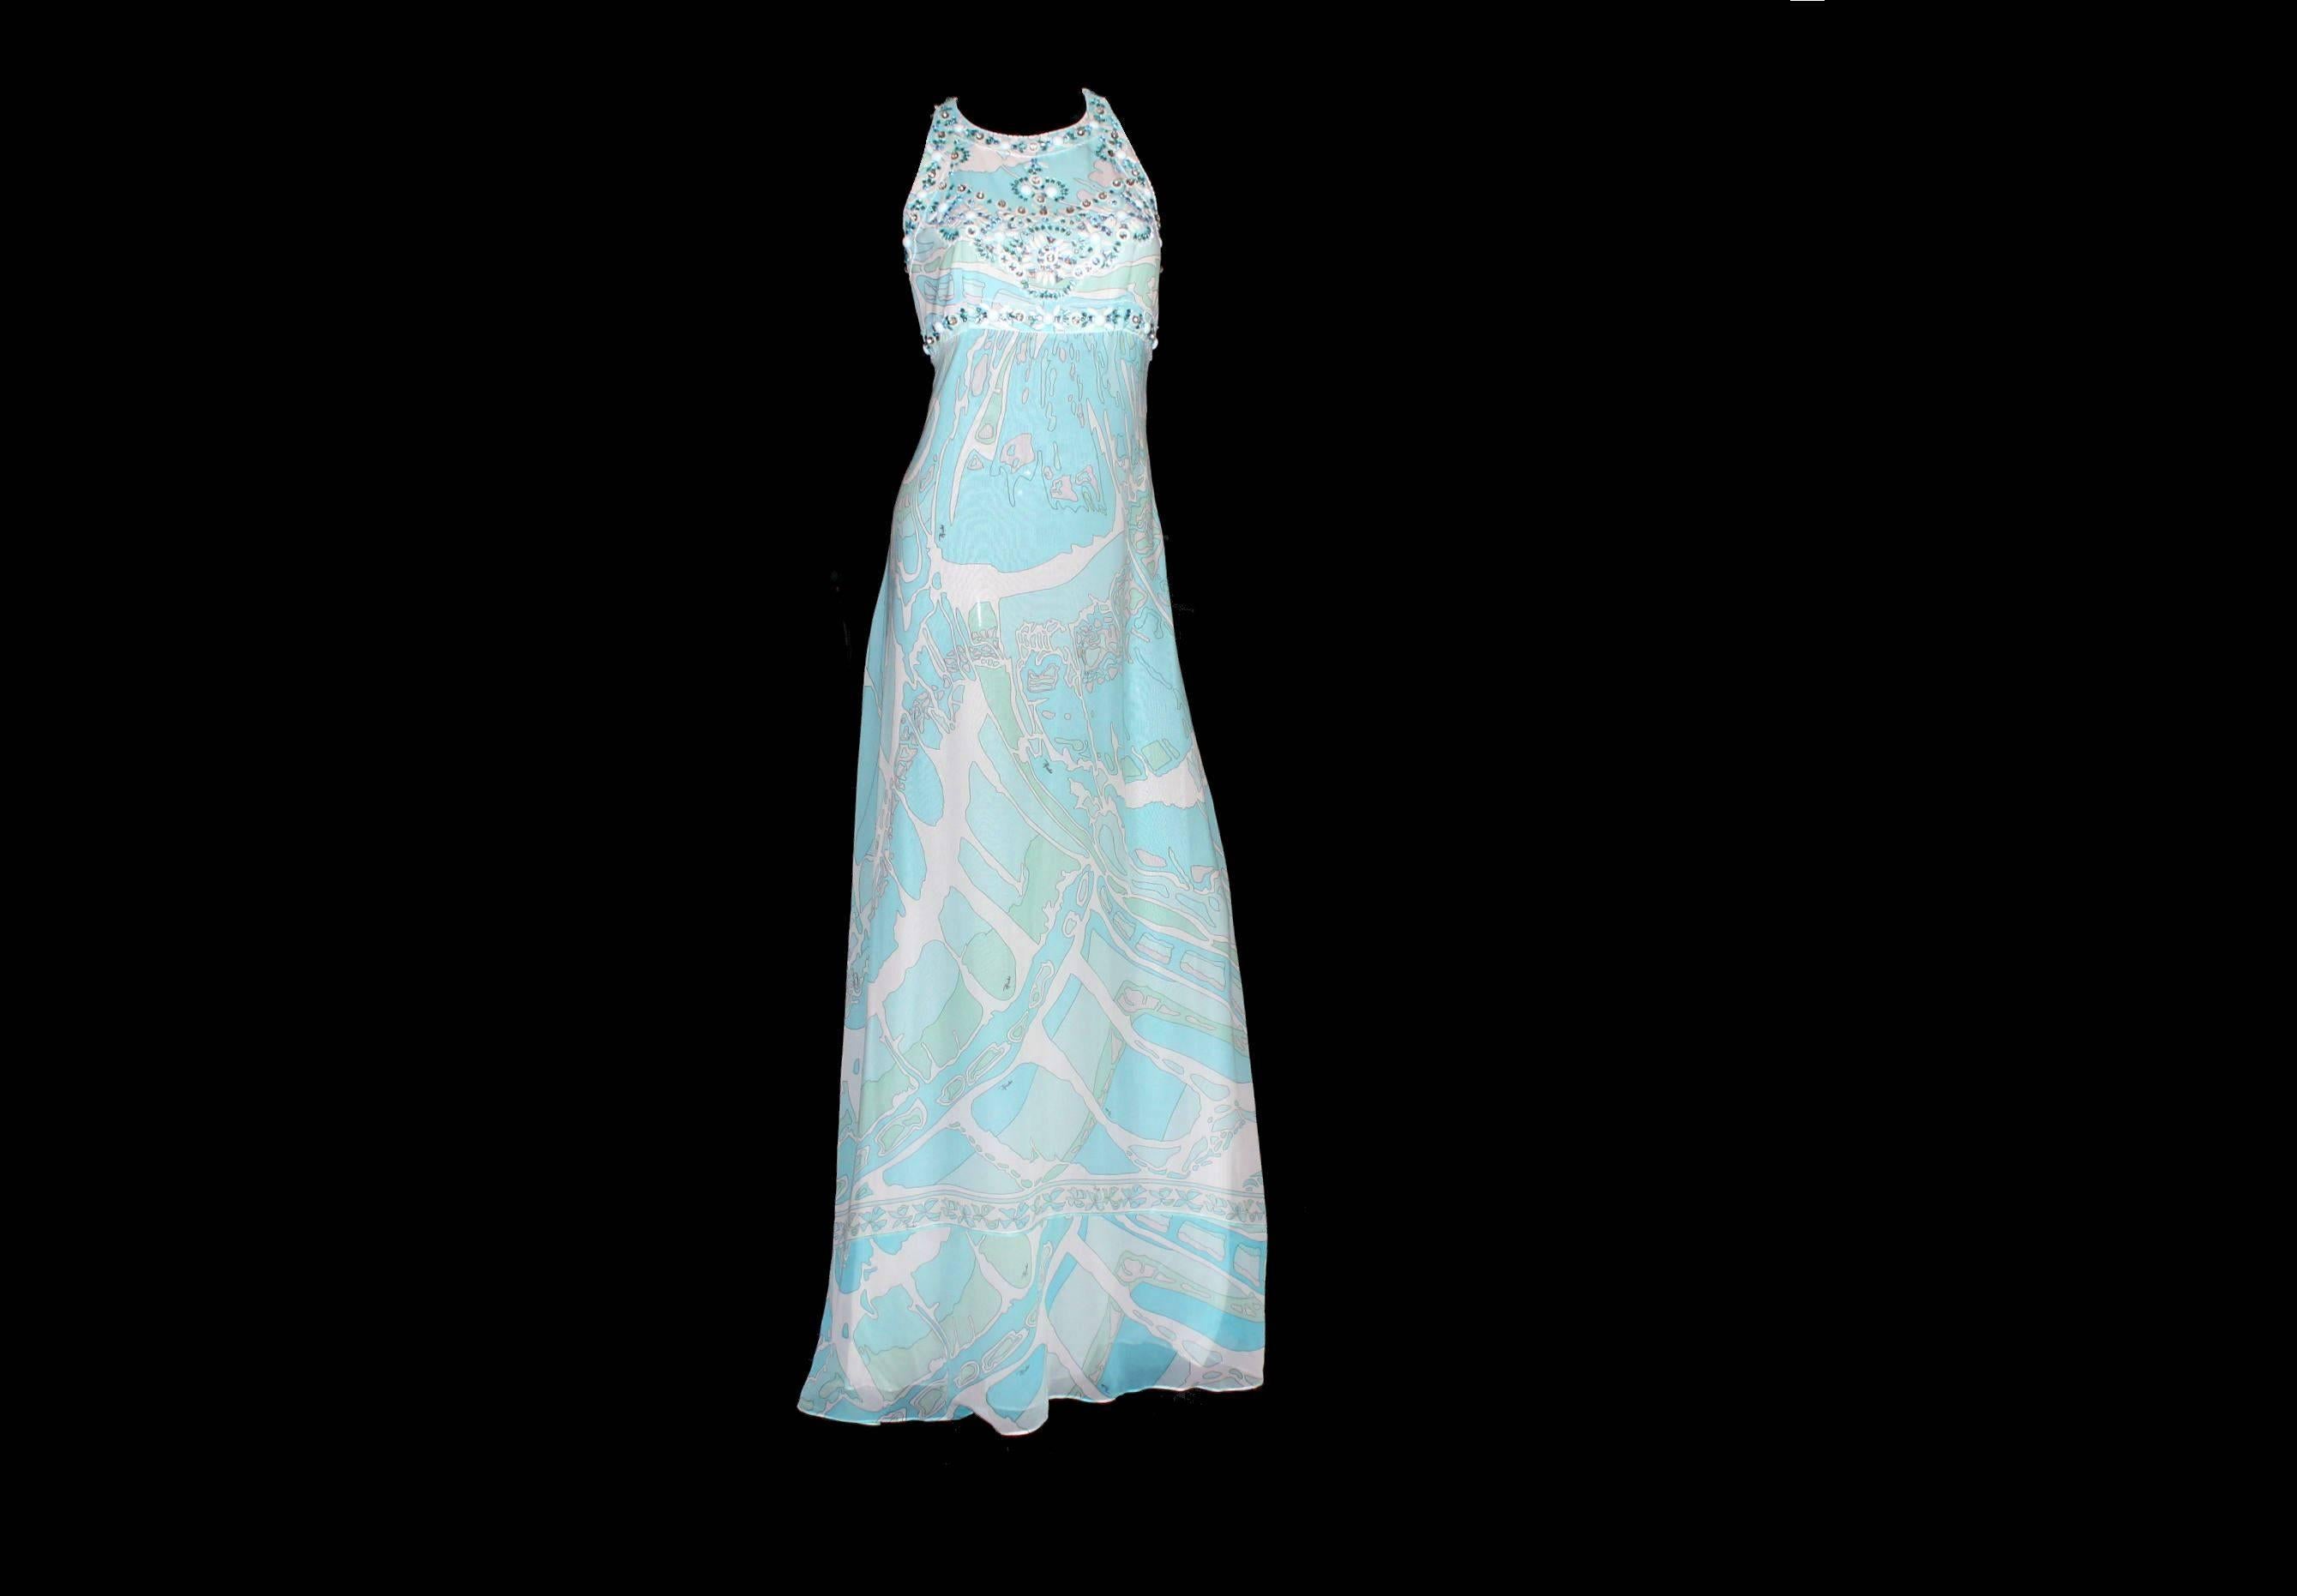 A piece of art like Haute Couture
Beautiful chiffon silk in the famous Emilio Pucci Signature Print
Amazing seafoam colors 
 Fabric signed discreetly with 